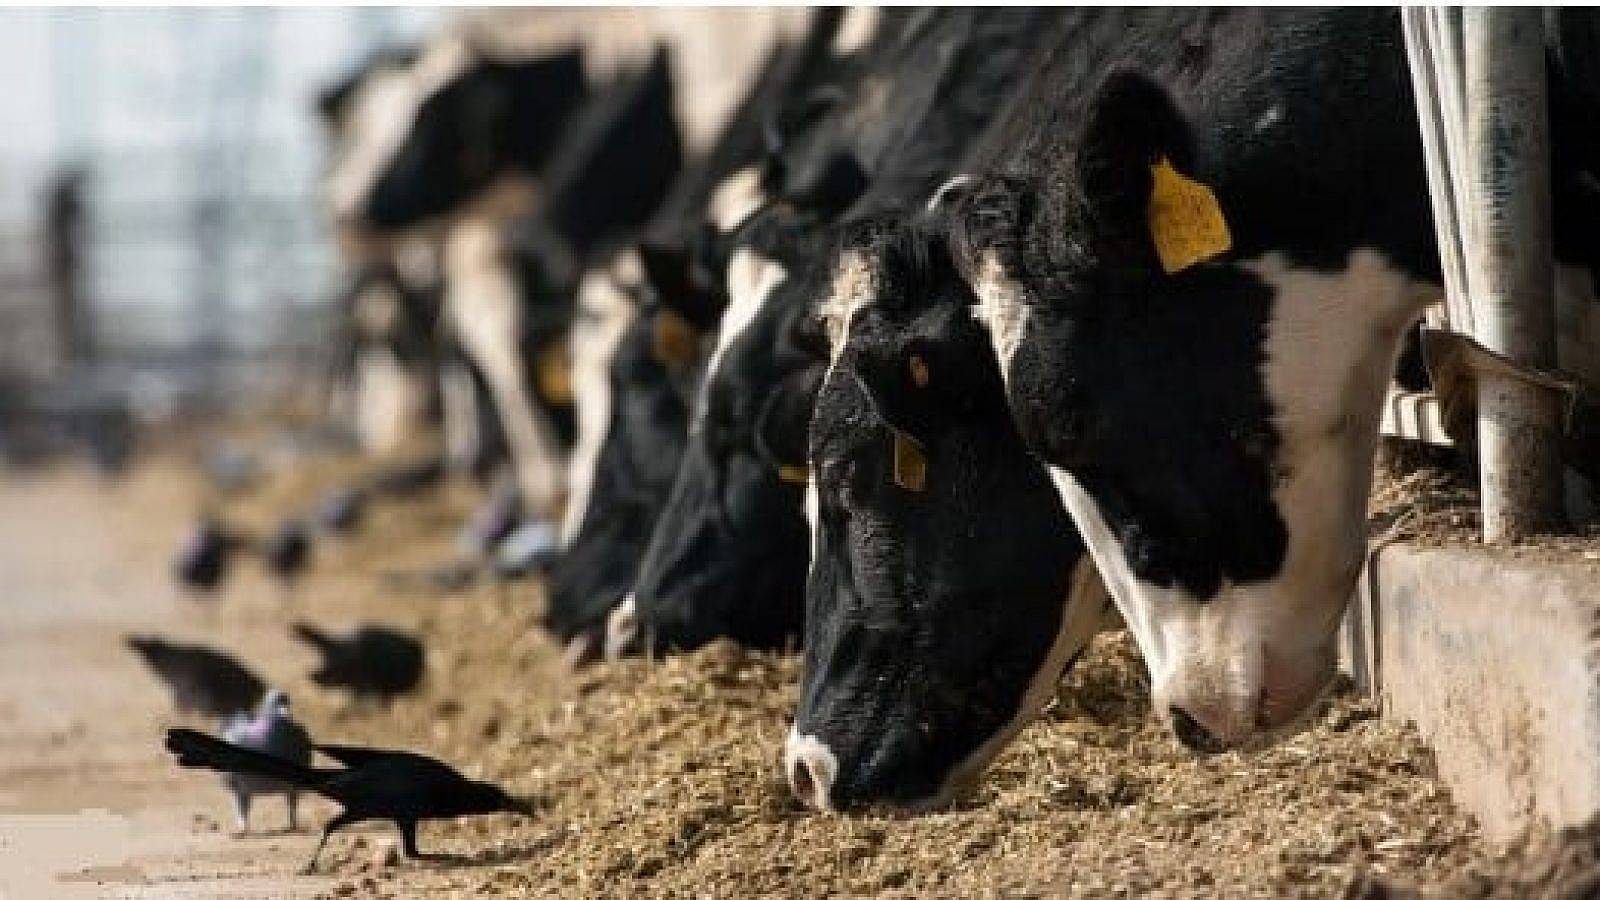 Dairy cows infected with avian flu virus